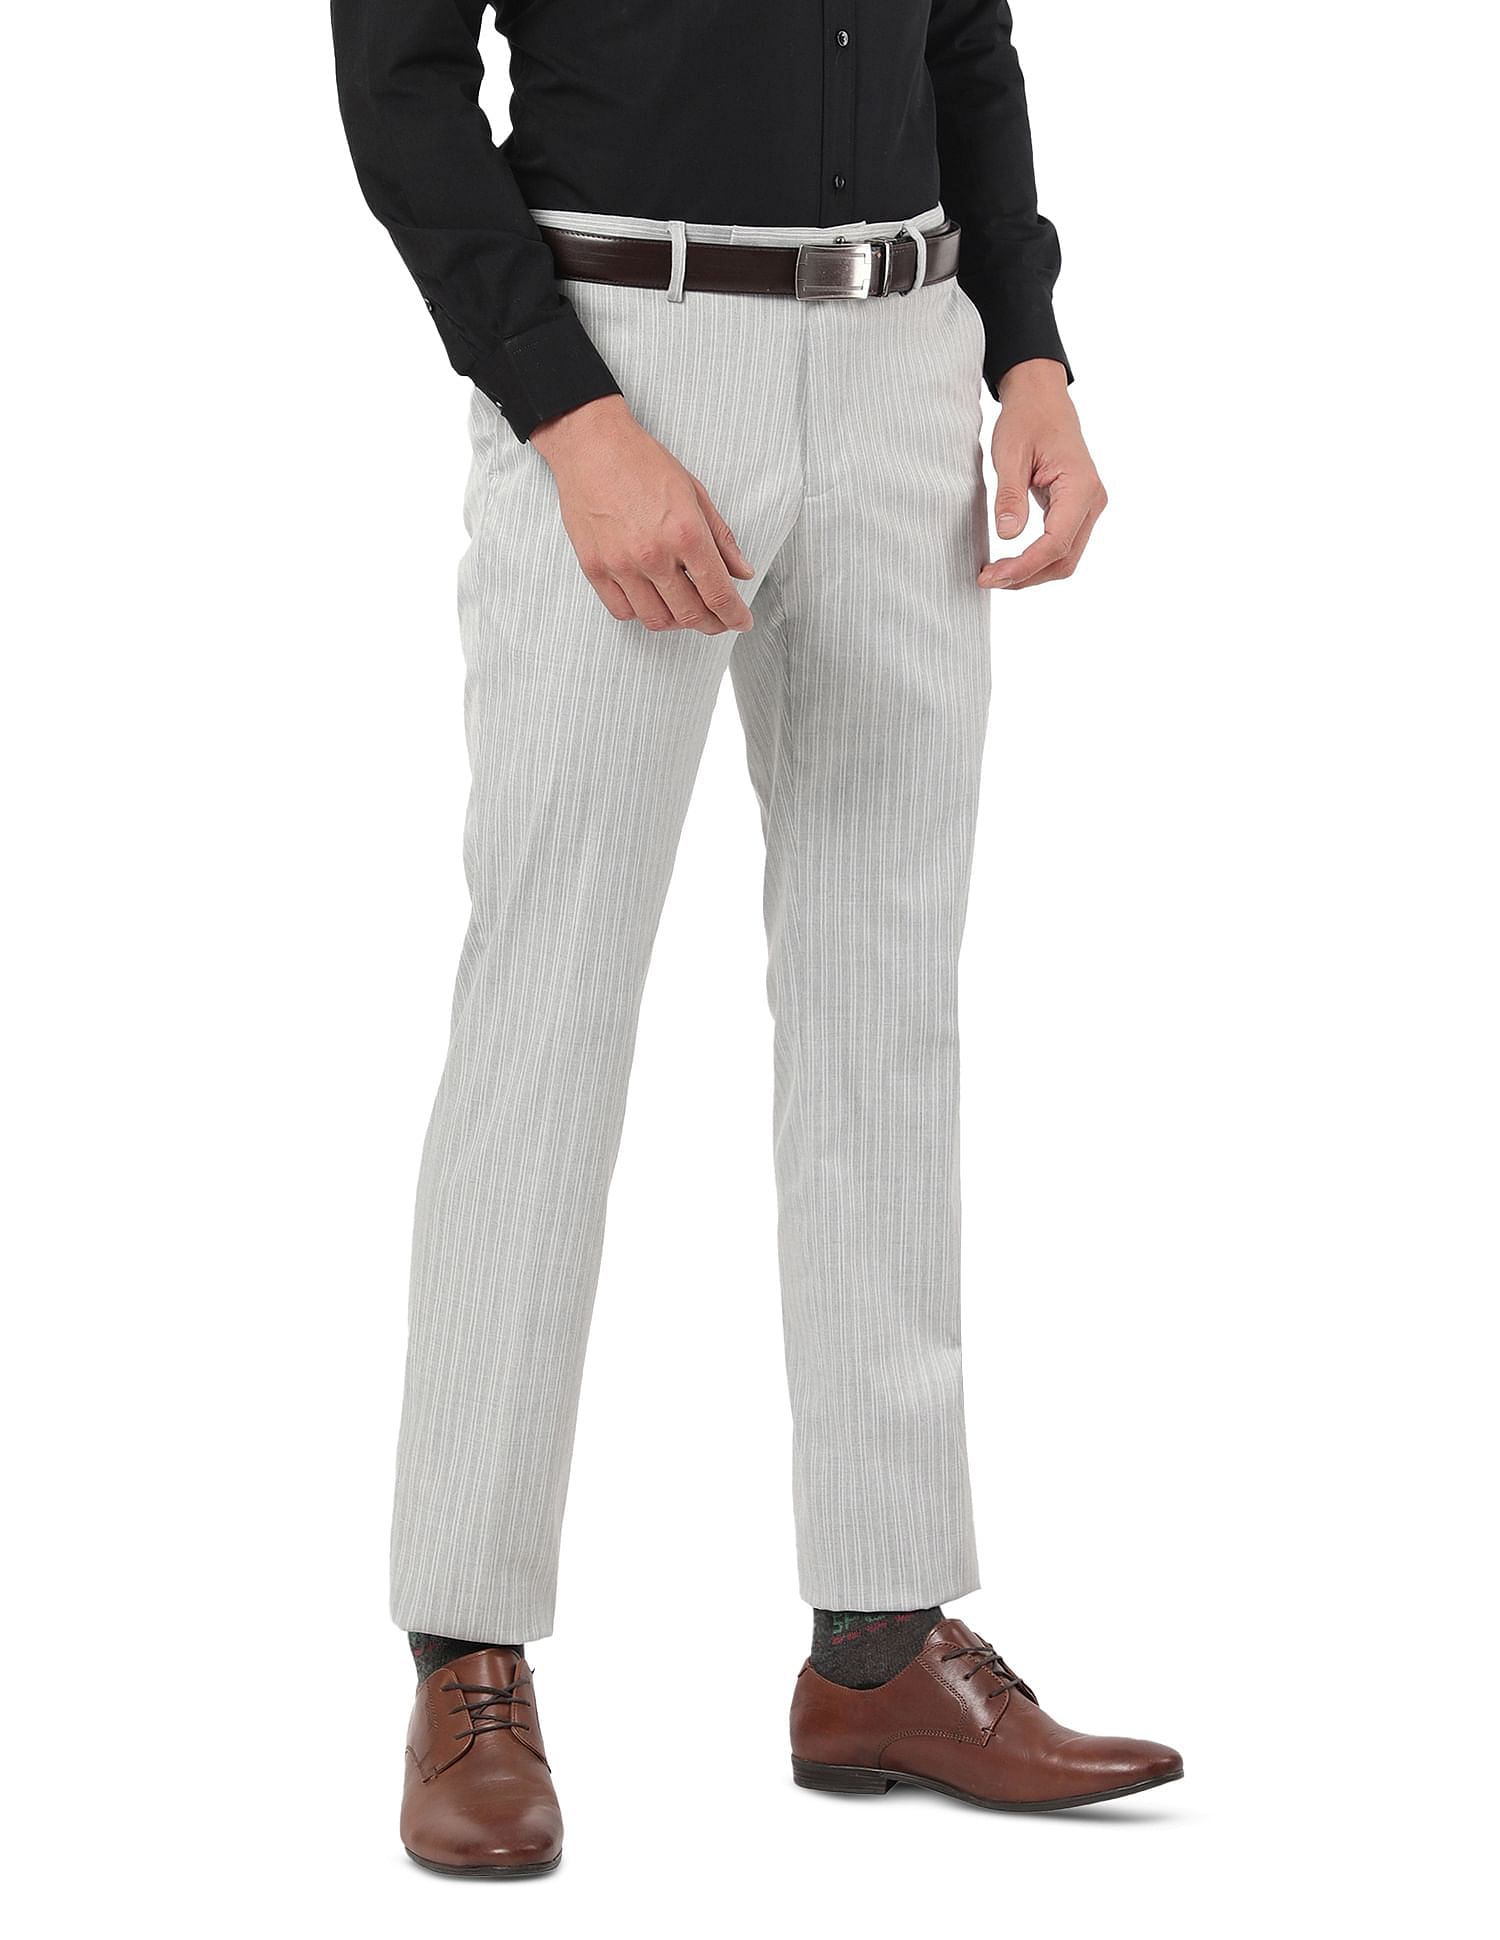 Raw Materials Requirement for Making Mens Formal Trousers